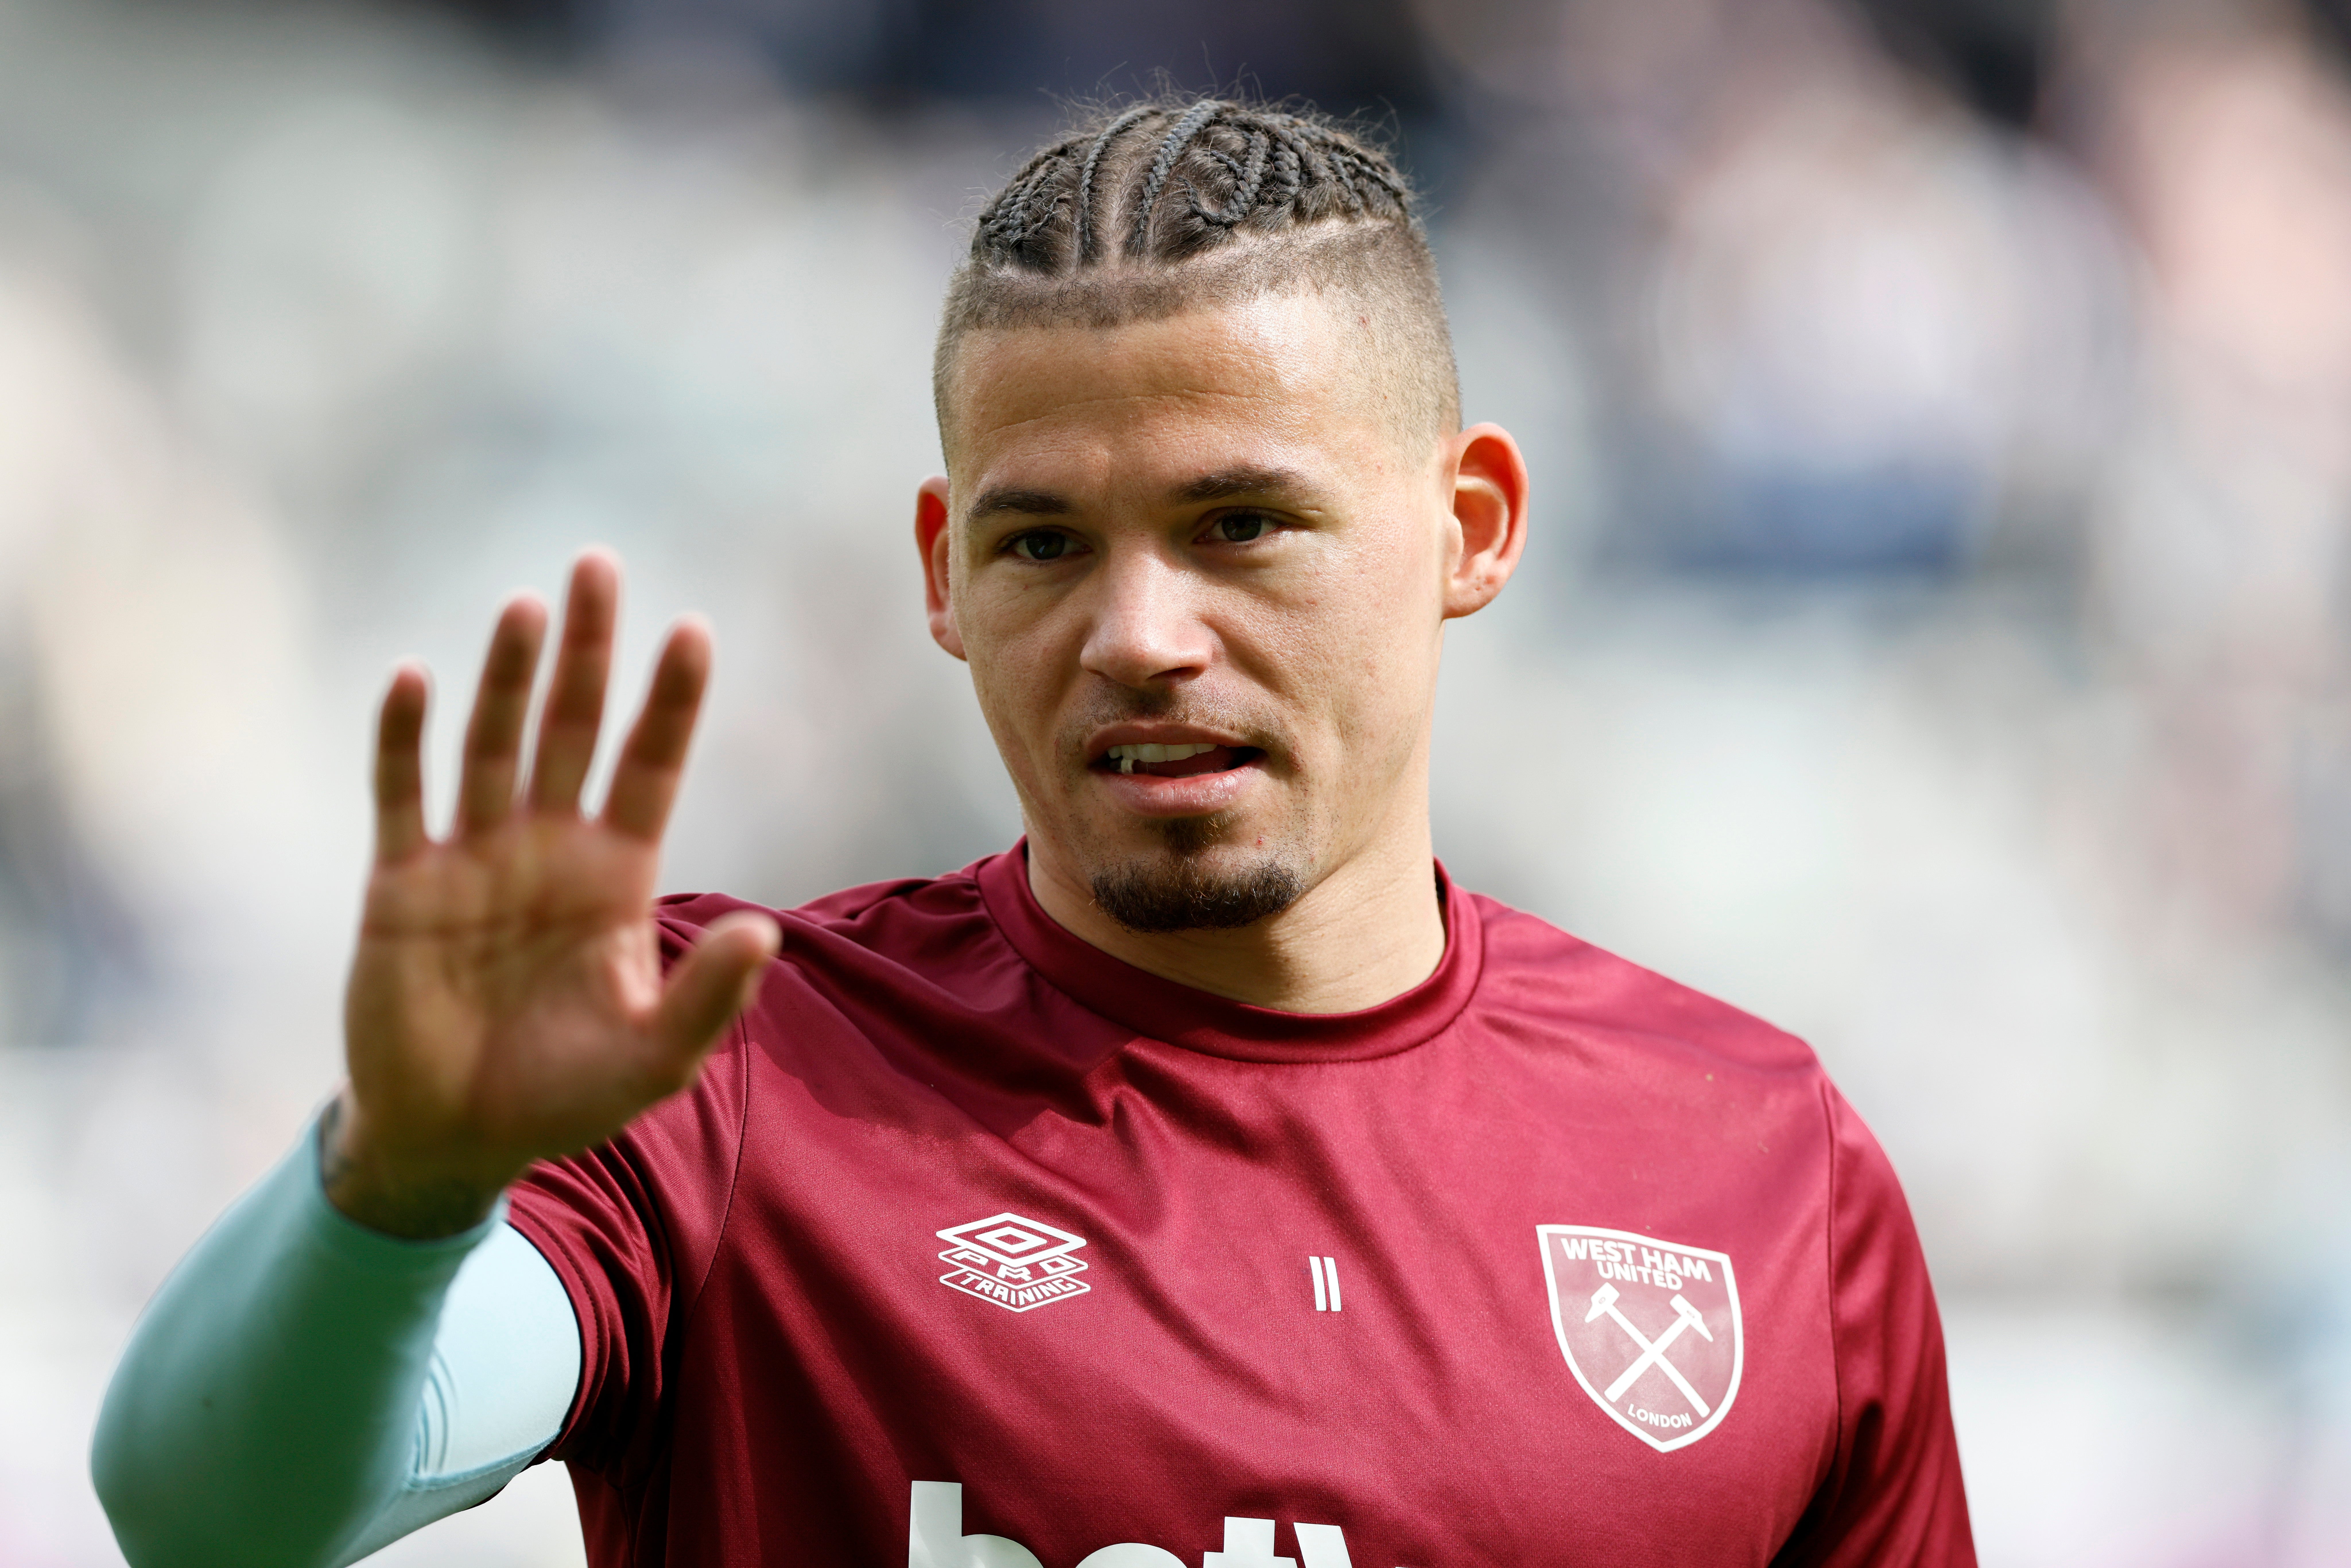 Kalvin Phillips has struggled to find his feet at West Ham